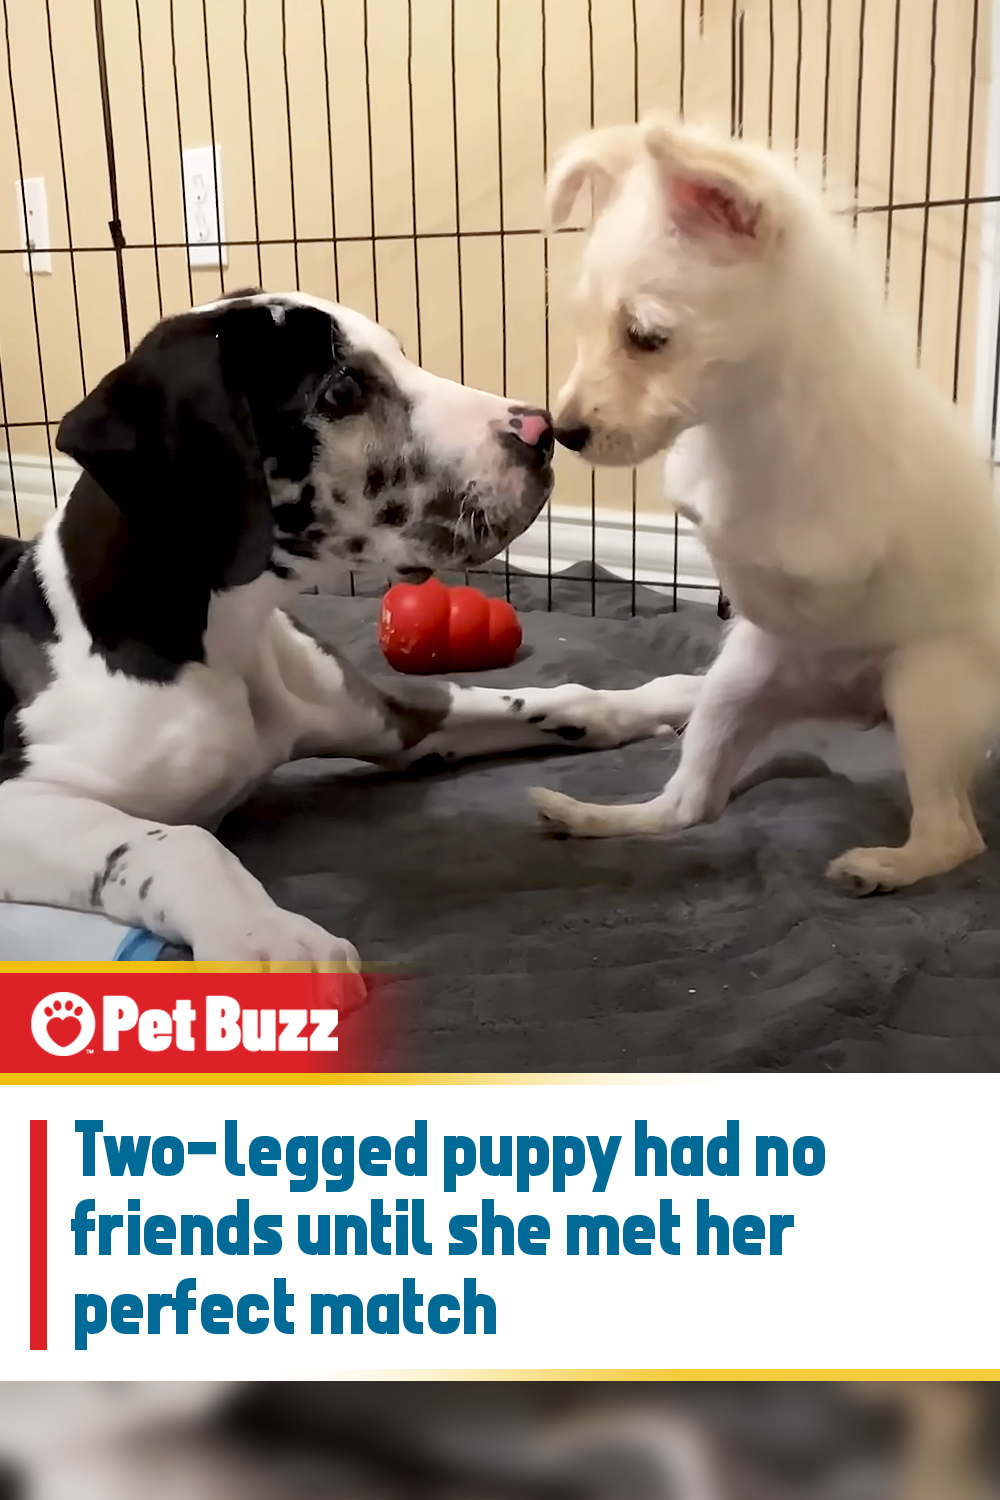 Two-legged puppy had no friends until she met her perfect match